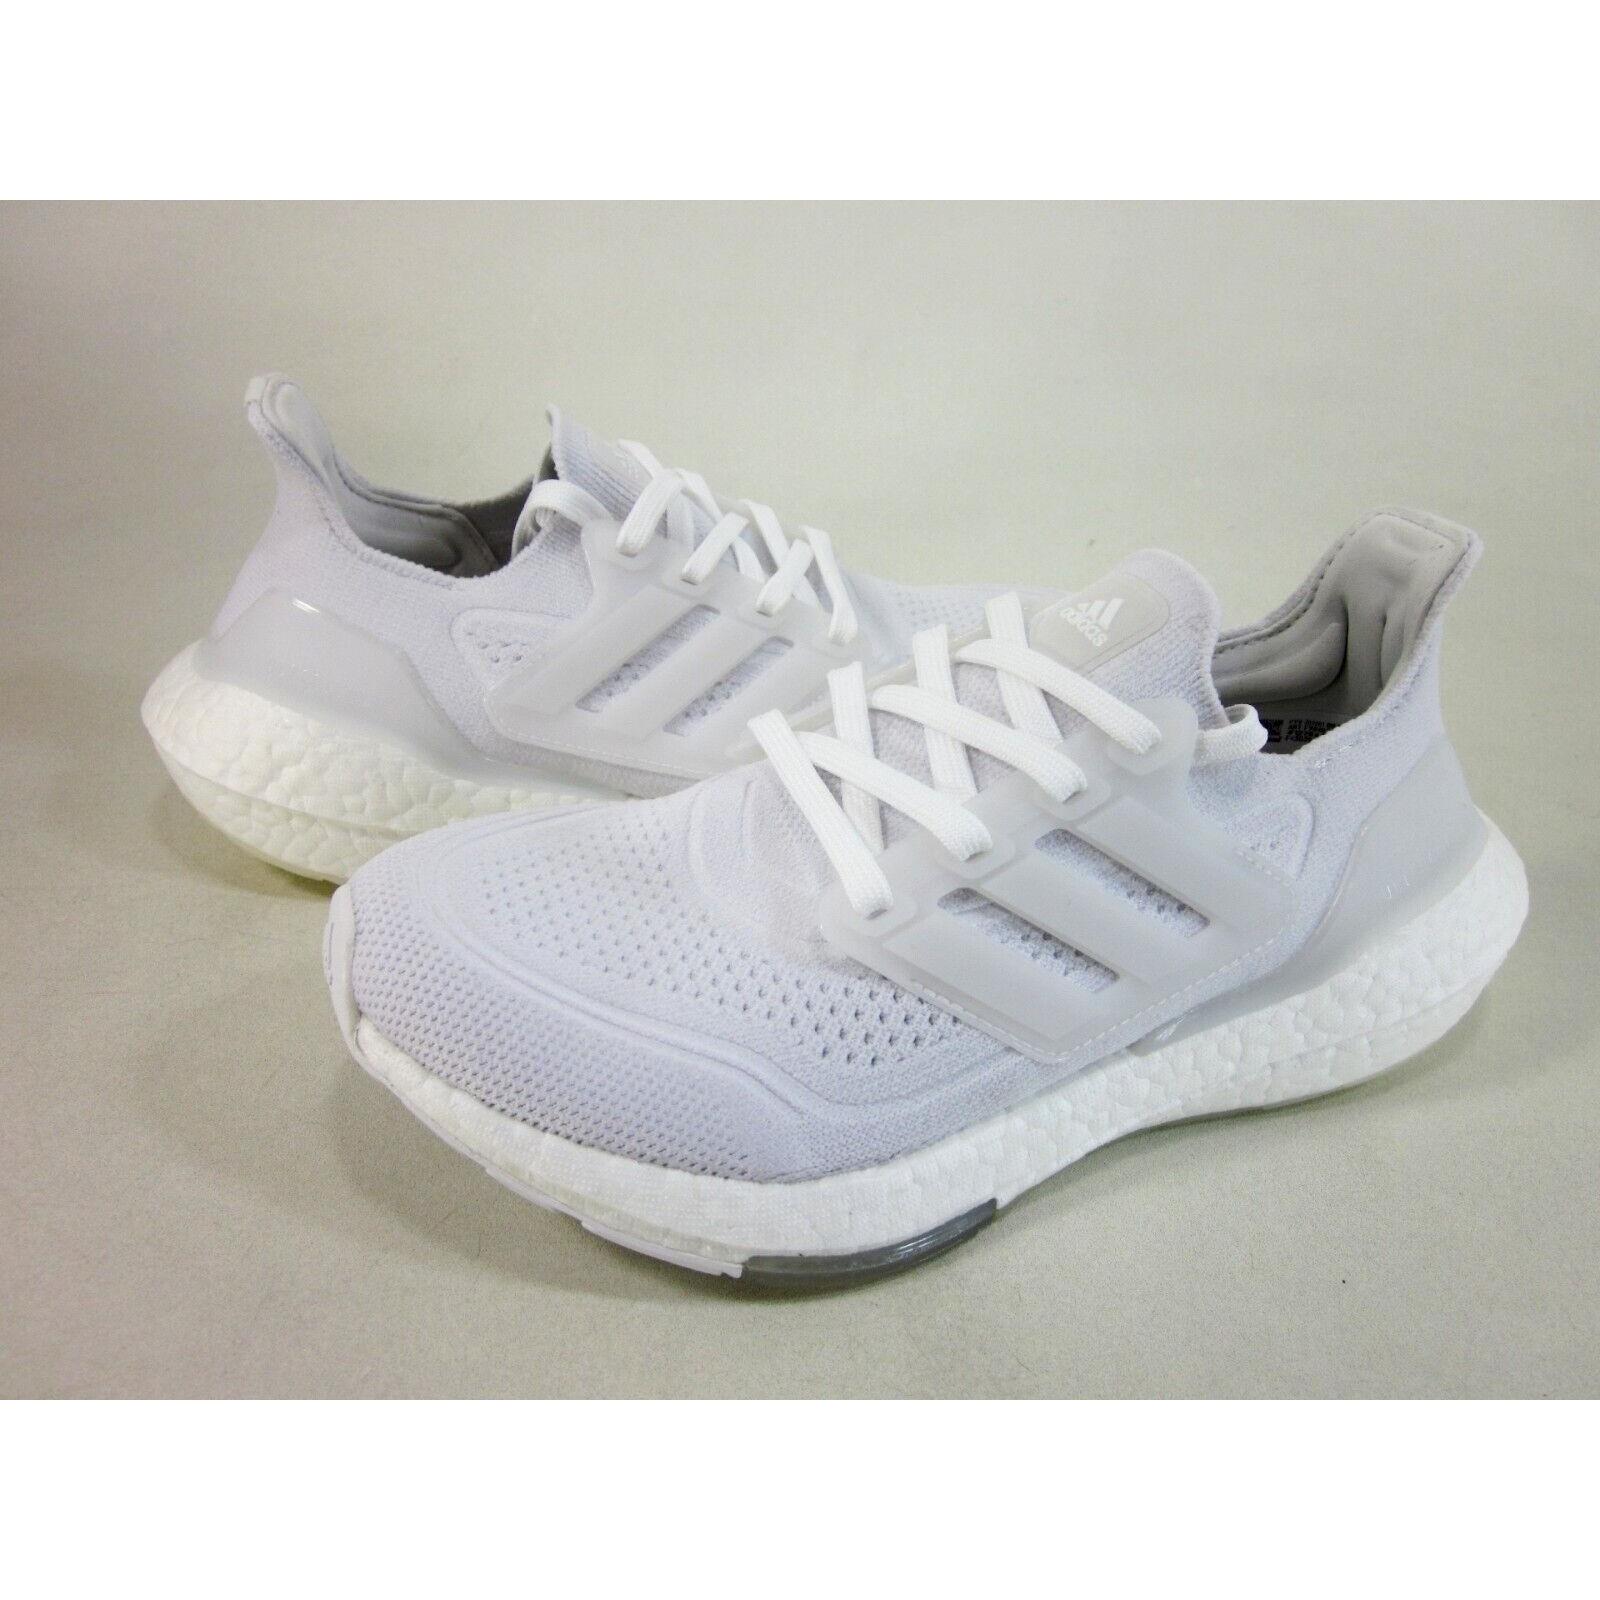 Adidas Women`s Ultraboost 21 Running Shoes FY0403 White/grey US Size 11.5 M